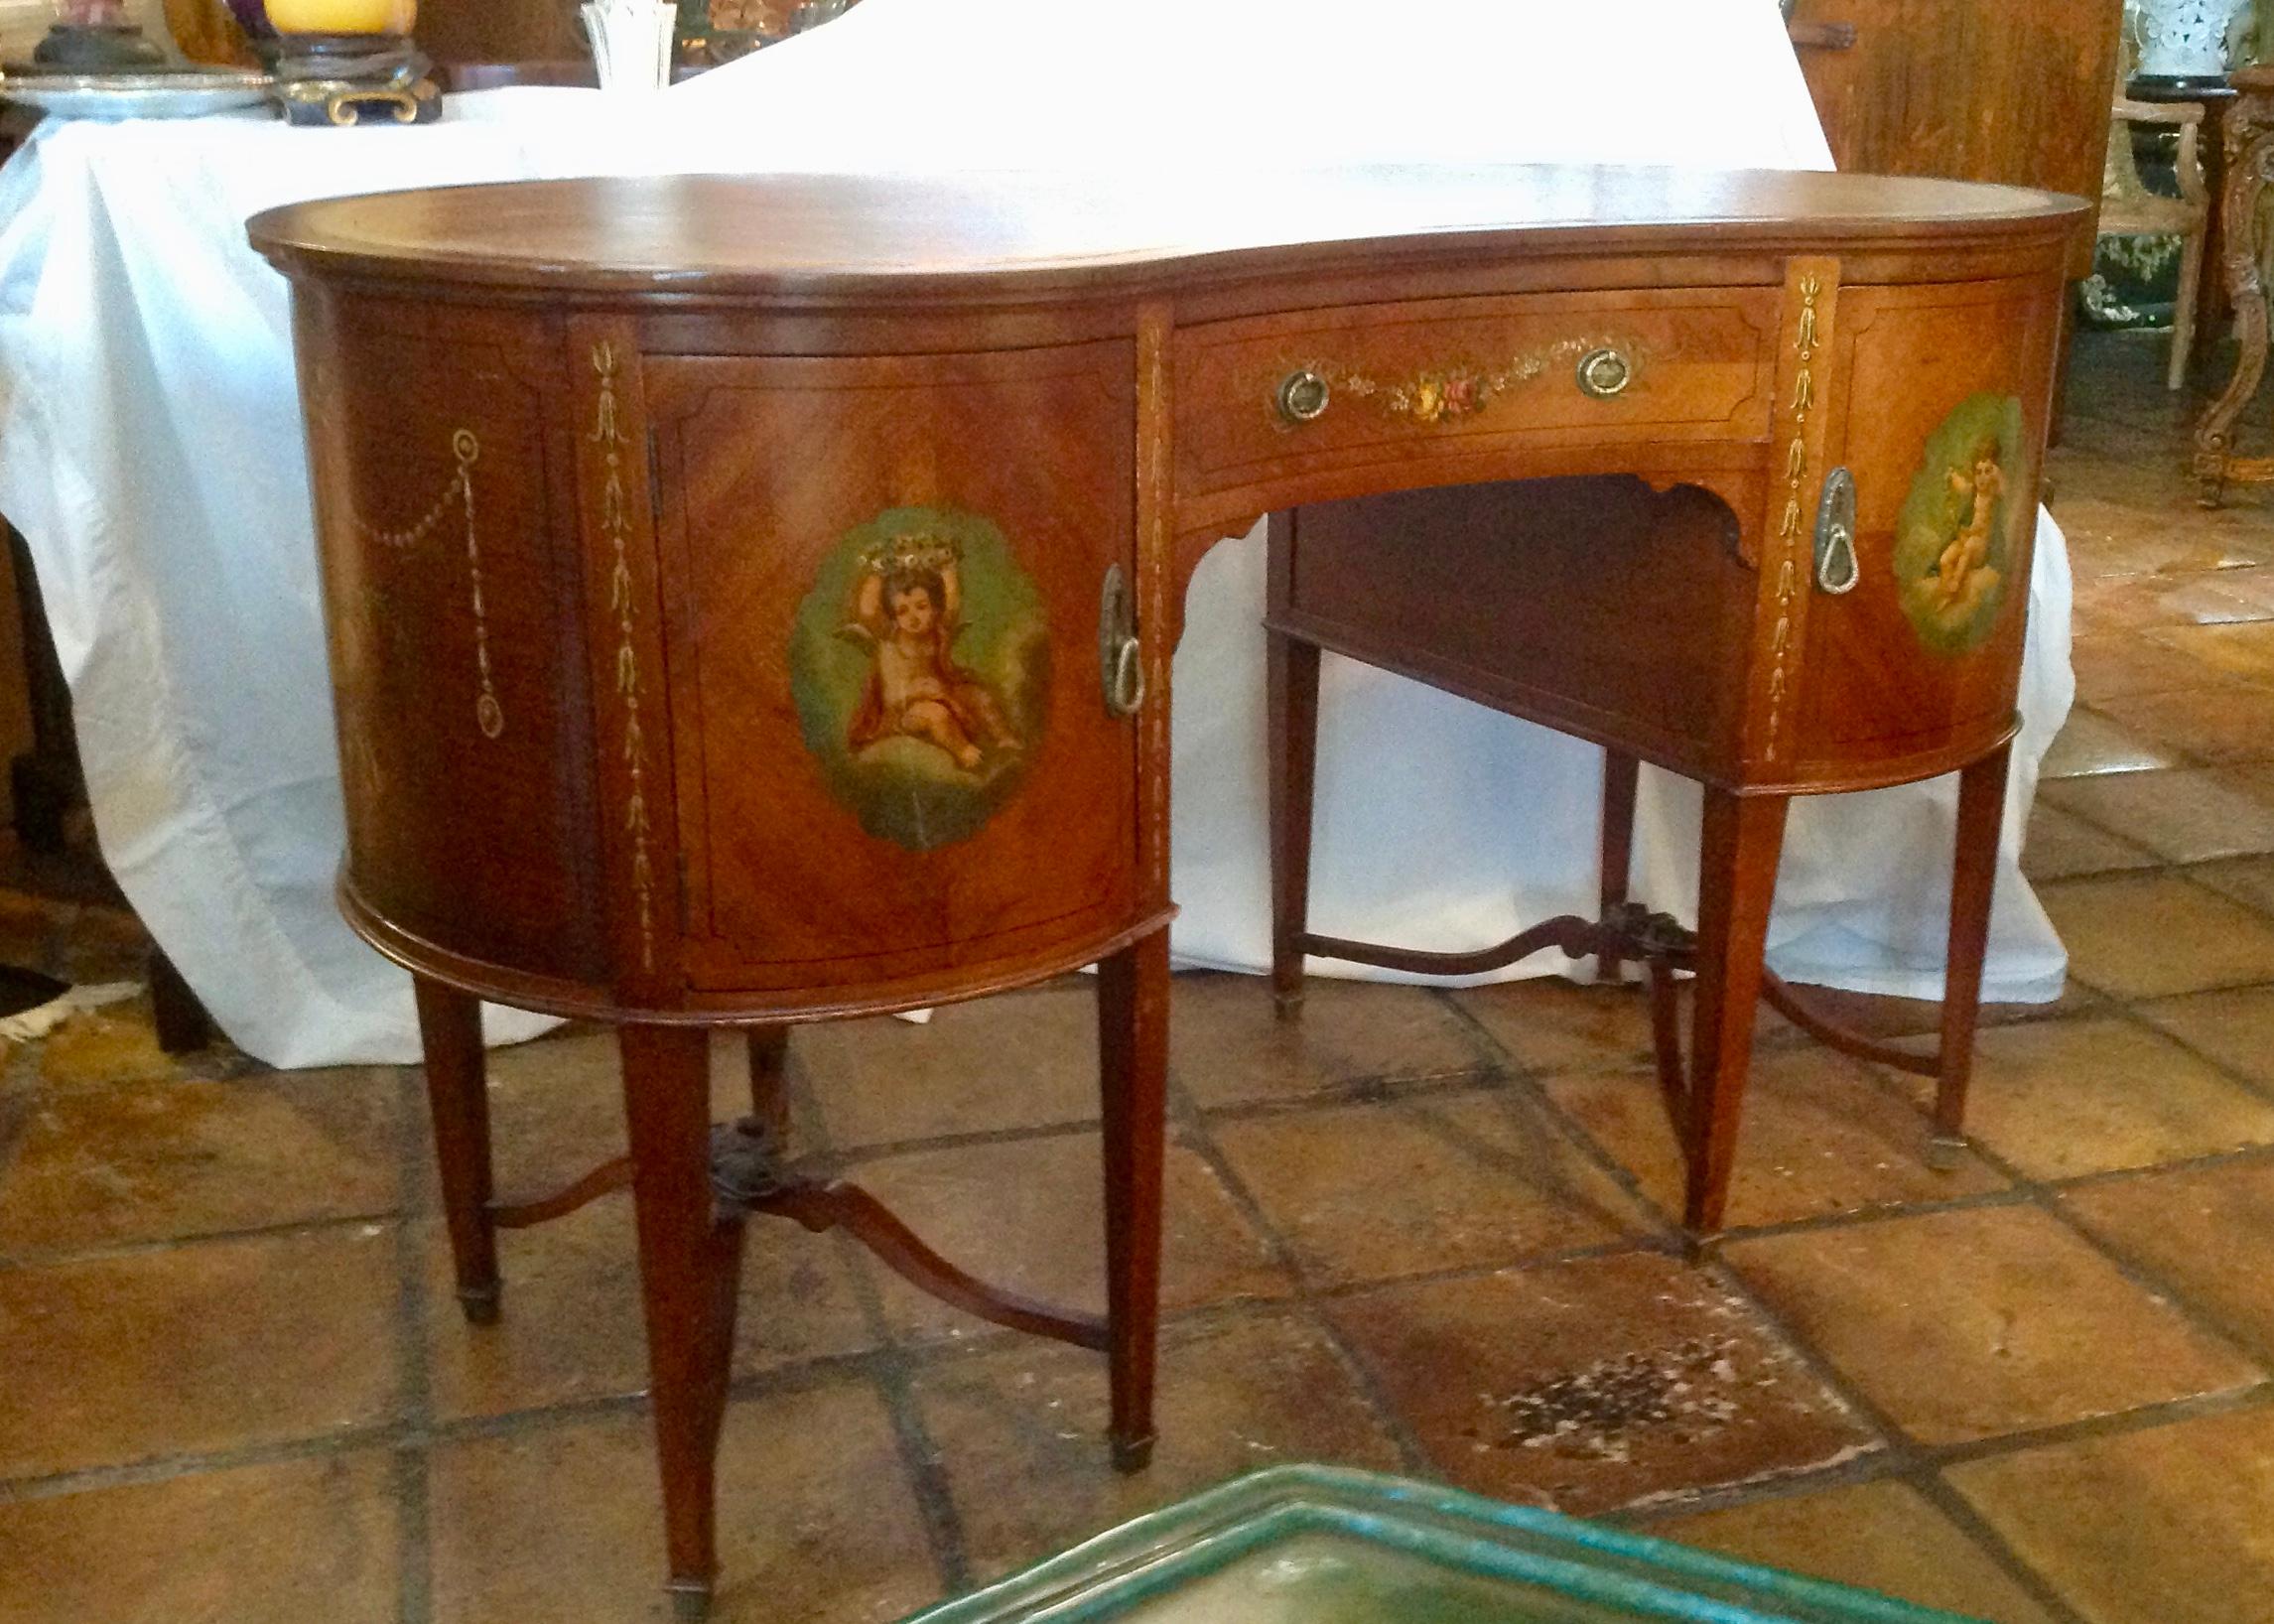 Superb quality, embellished with fine classic paintings.
Very nicely detailed with elaborate twin cross stretches and appointed
with a lather top. The drawer is finished with dust liners.
Desirable kidney form.